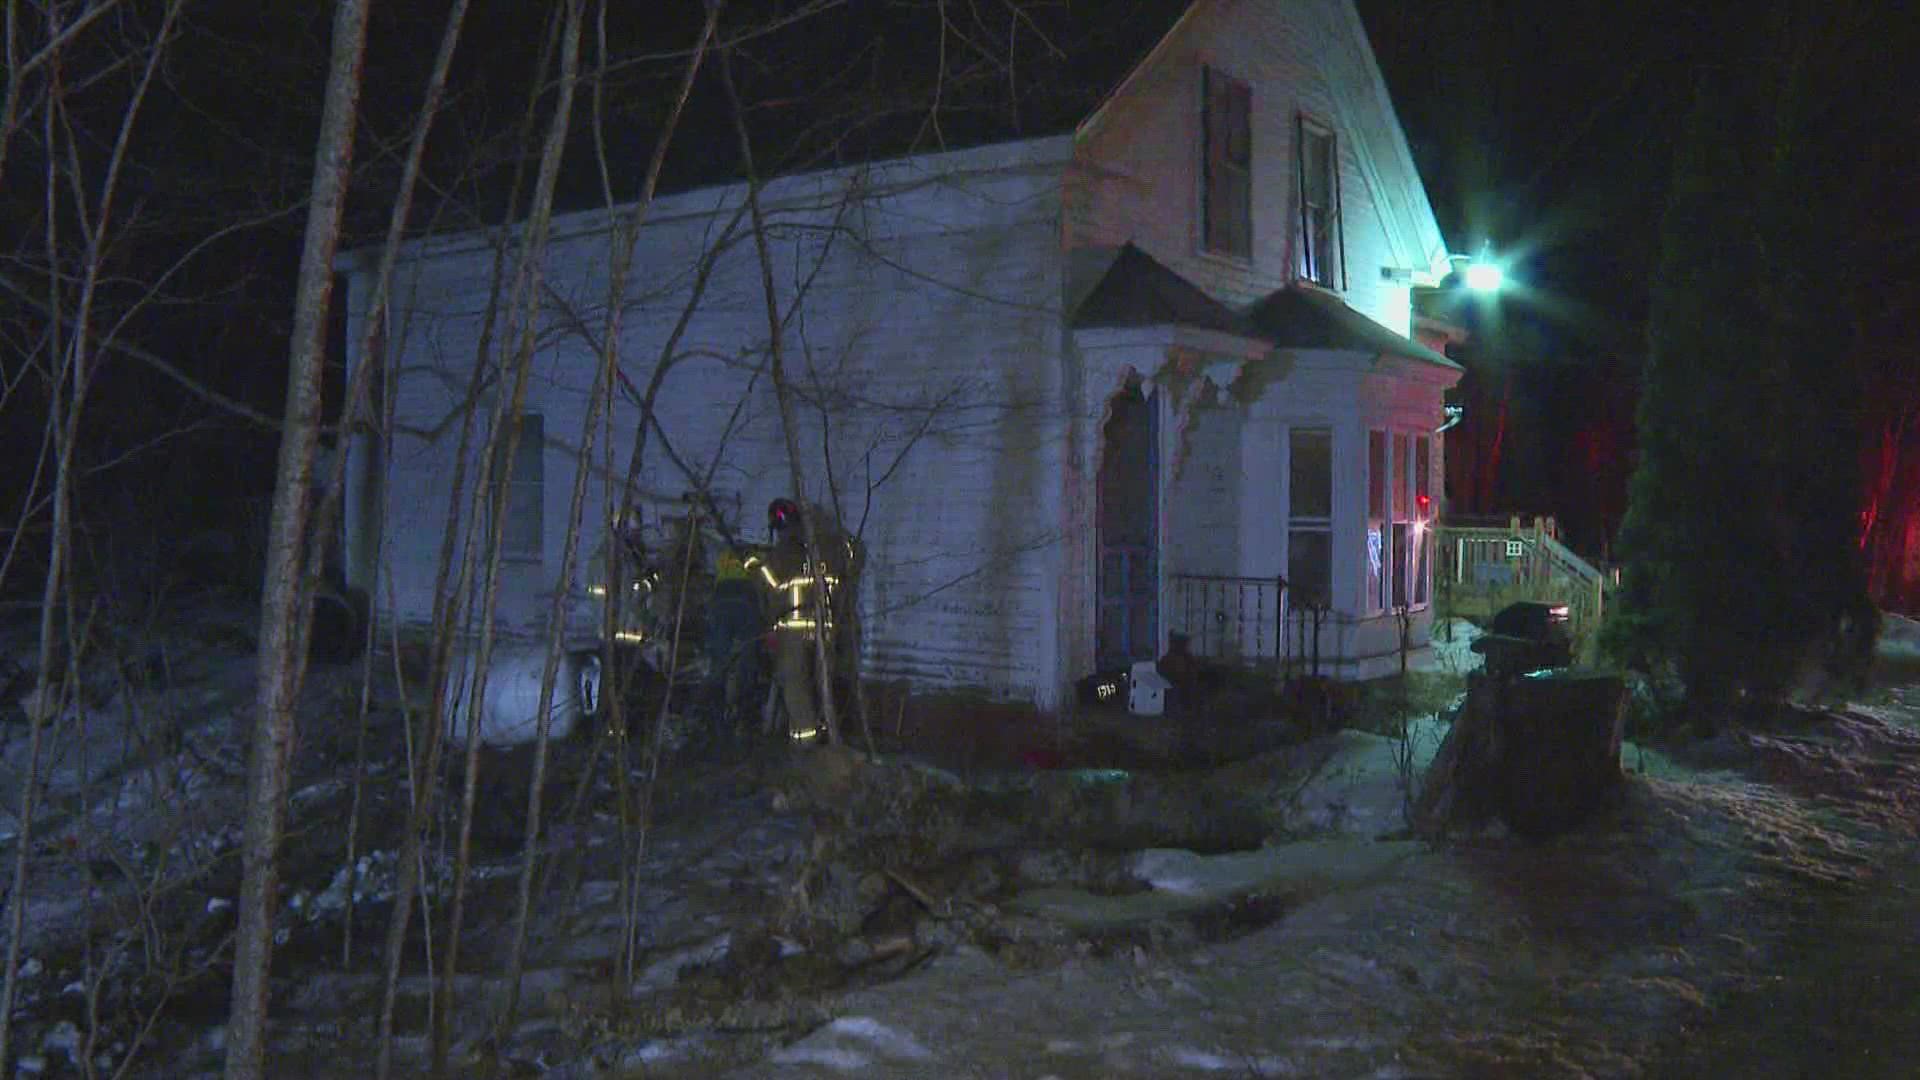 State Police are investigating what caused a driver to crash into a home in York County.